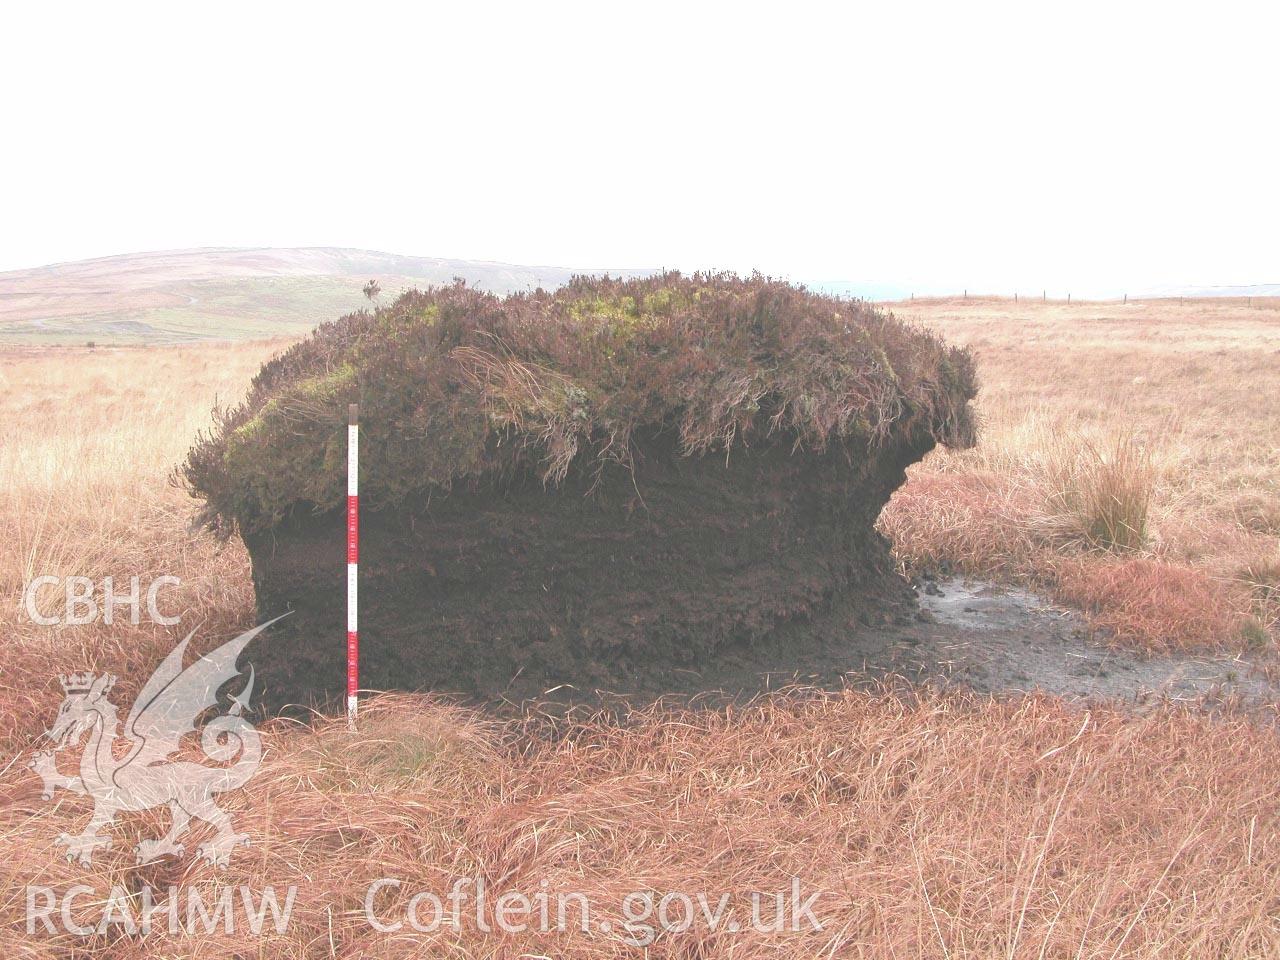 Colour photograph taken at the assessment site, measuring peat depth.